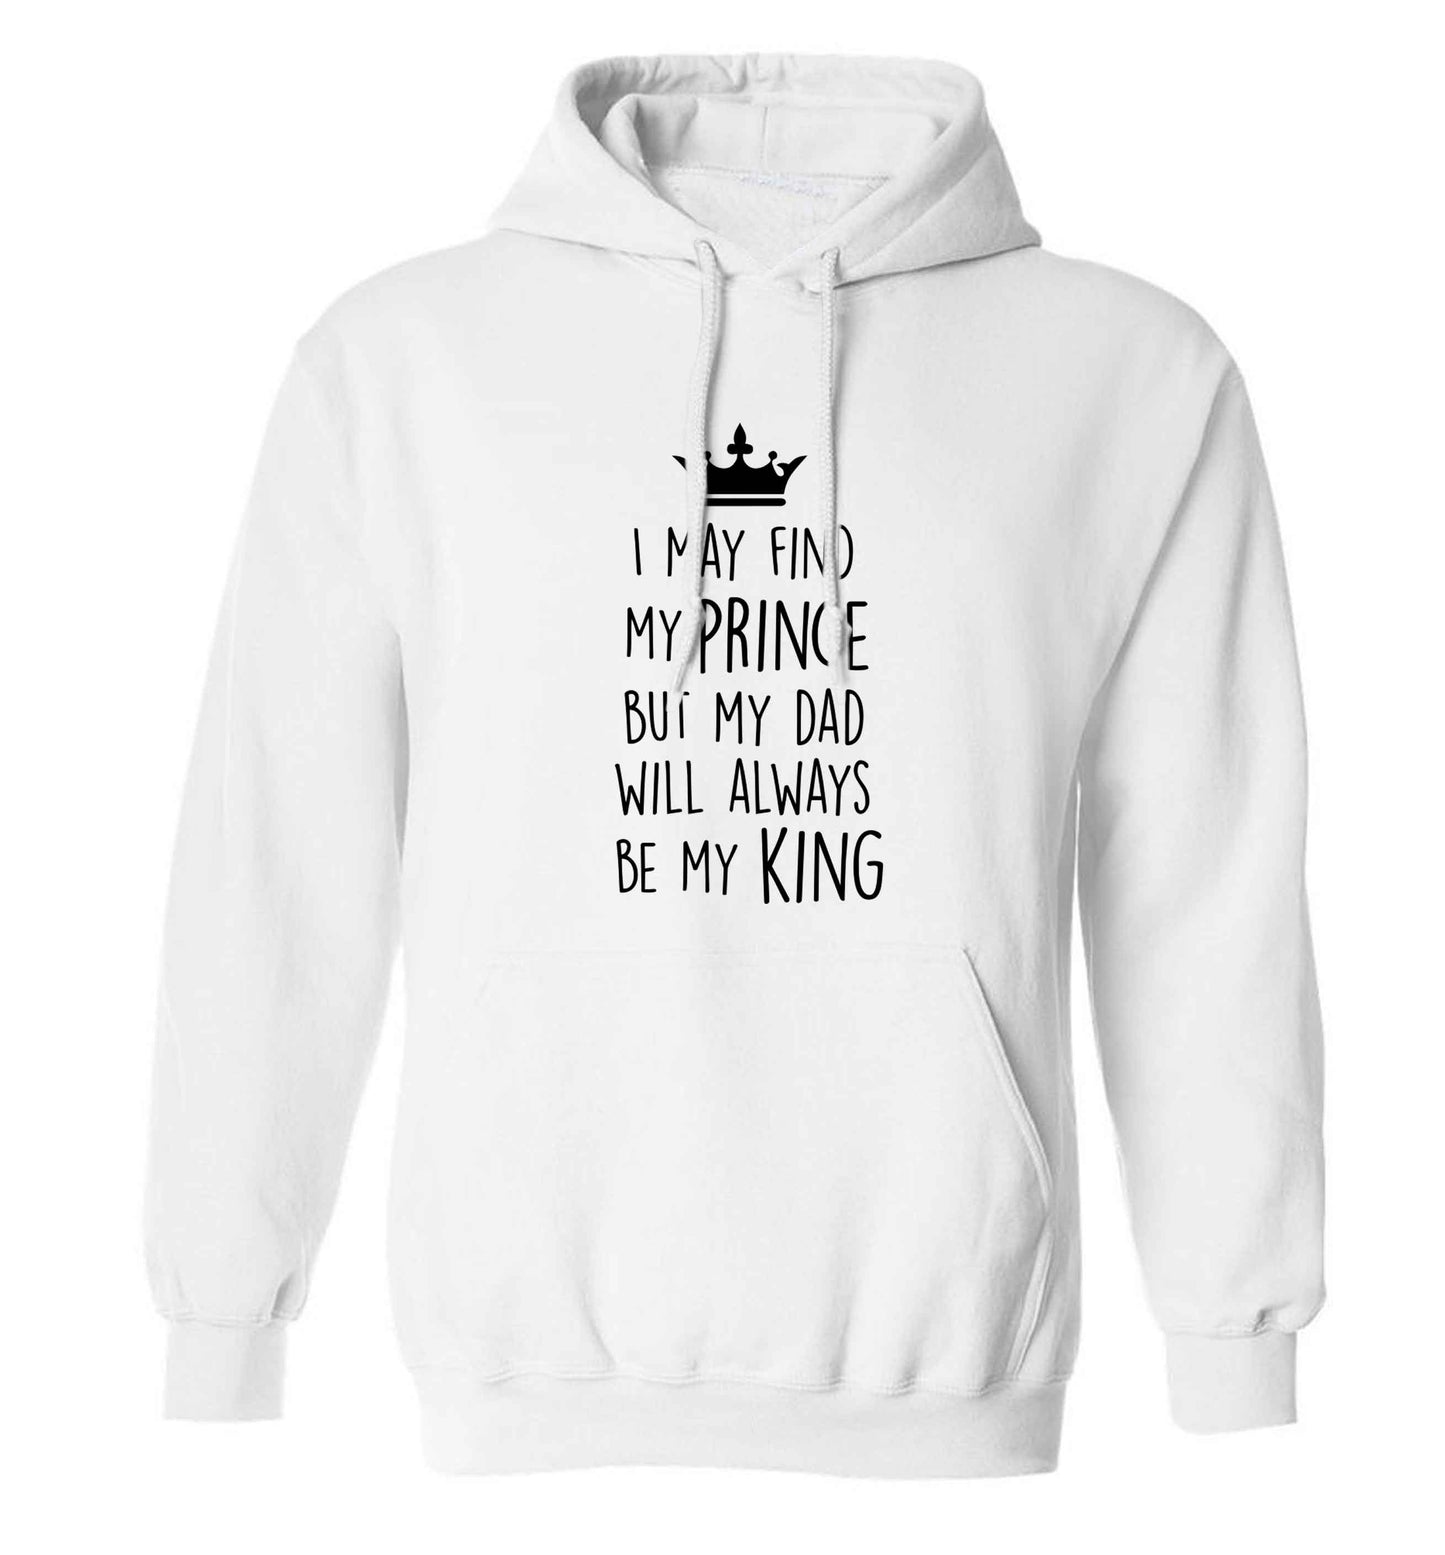 I may find my prince but my dad will always be my king adults unisex white hoodie 2XL